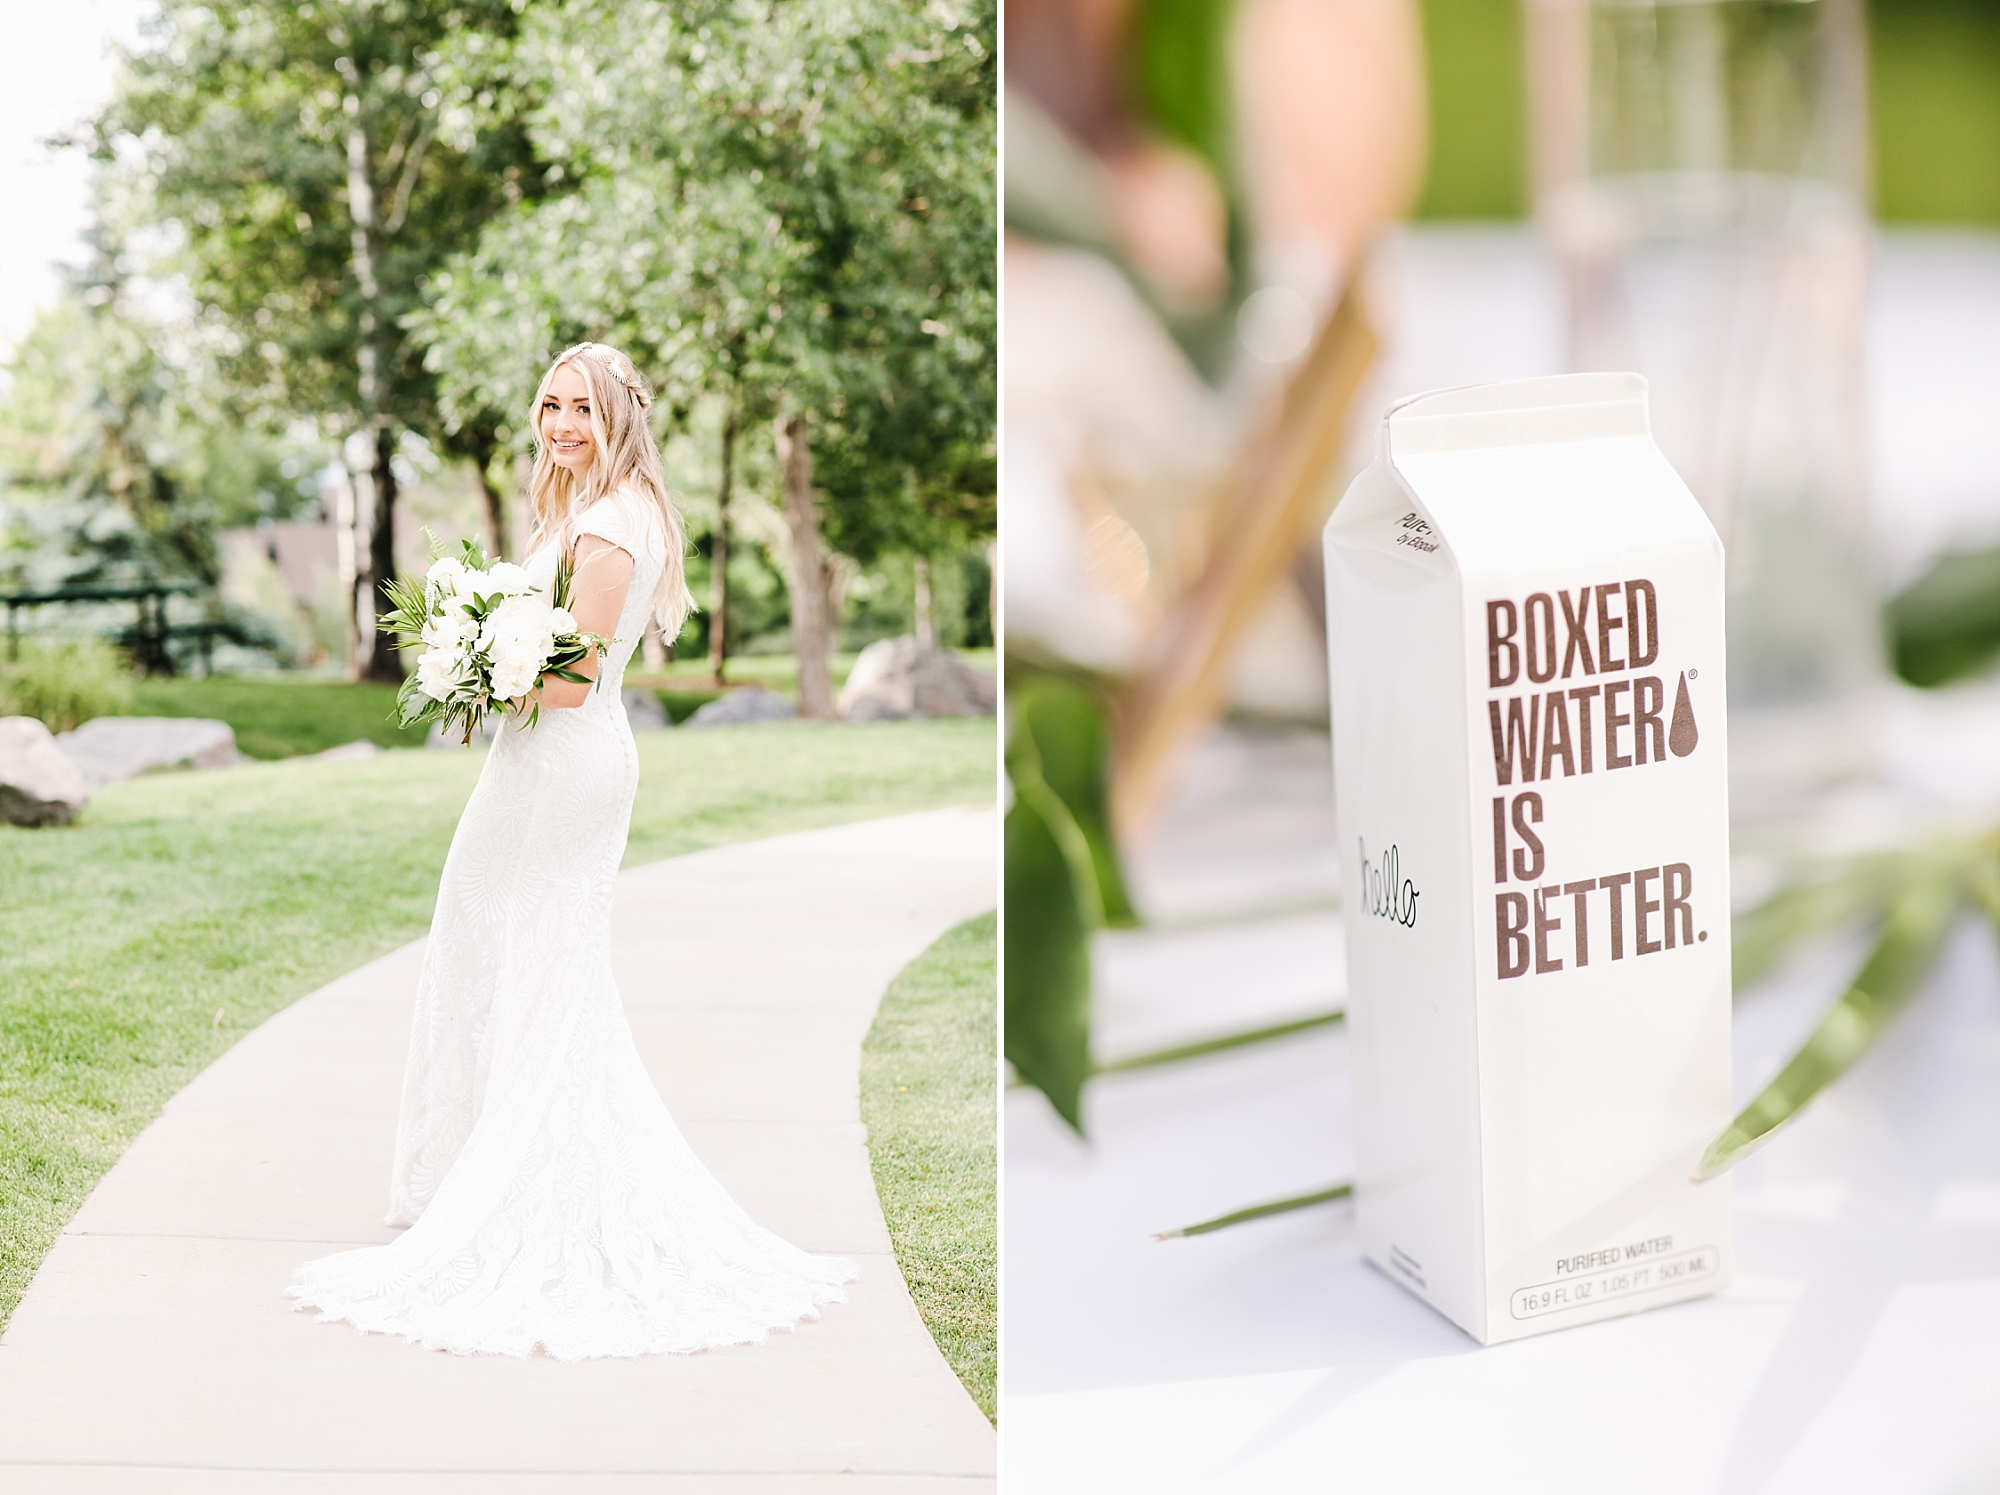 Buy boxed water for your wedding reception